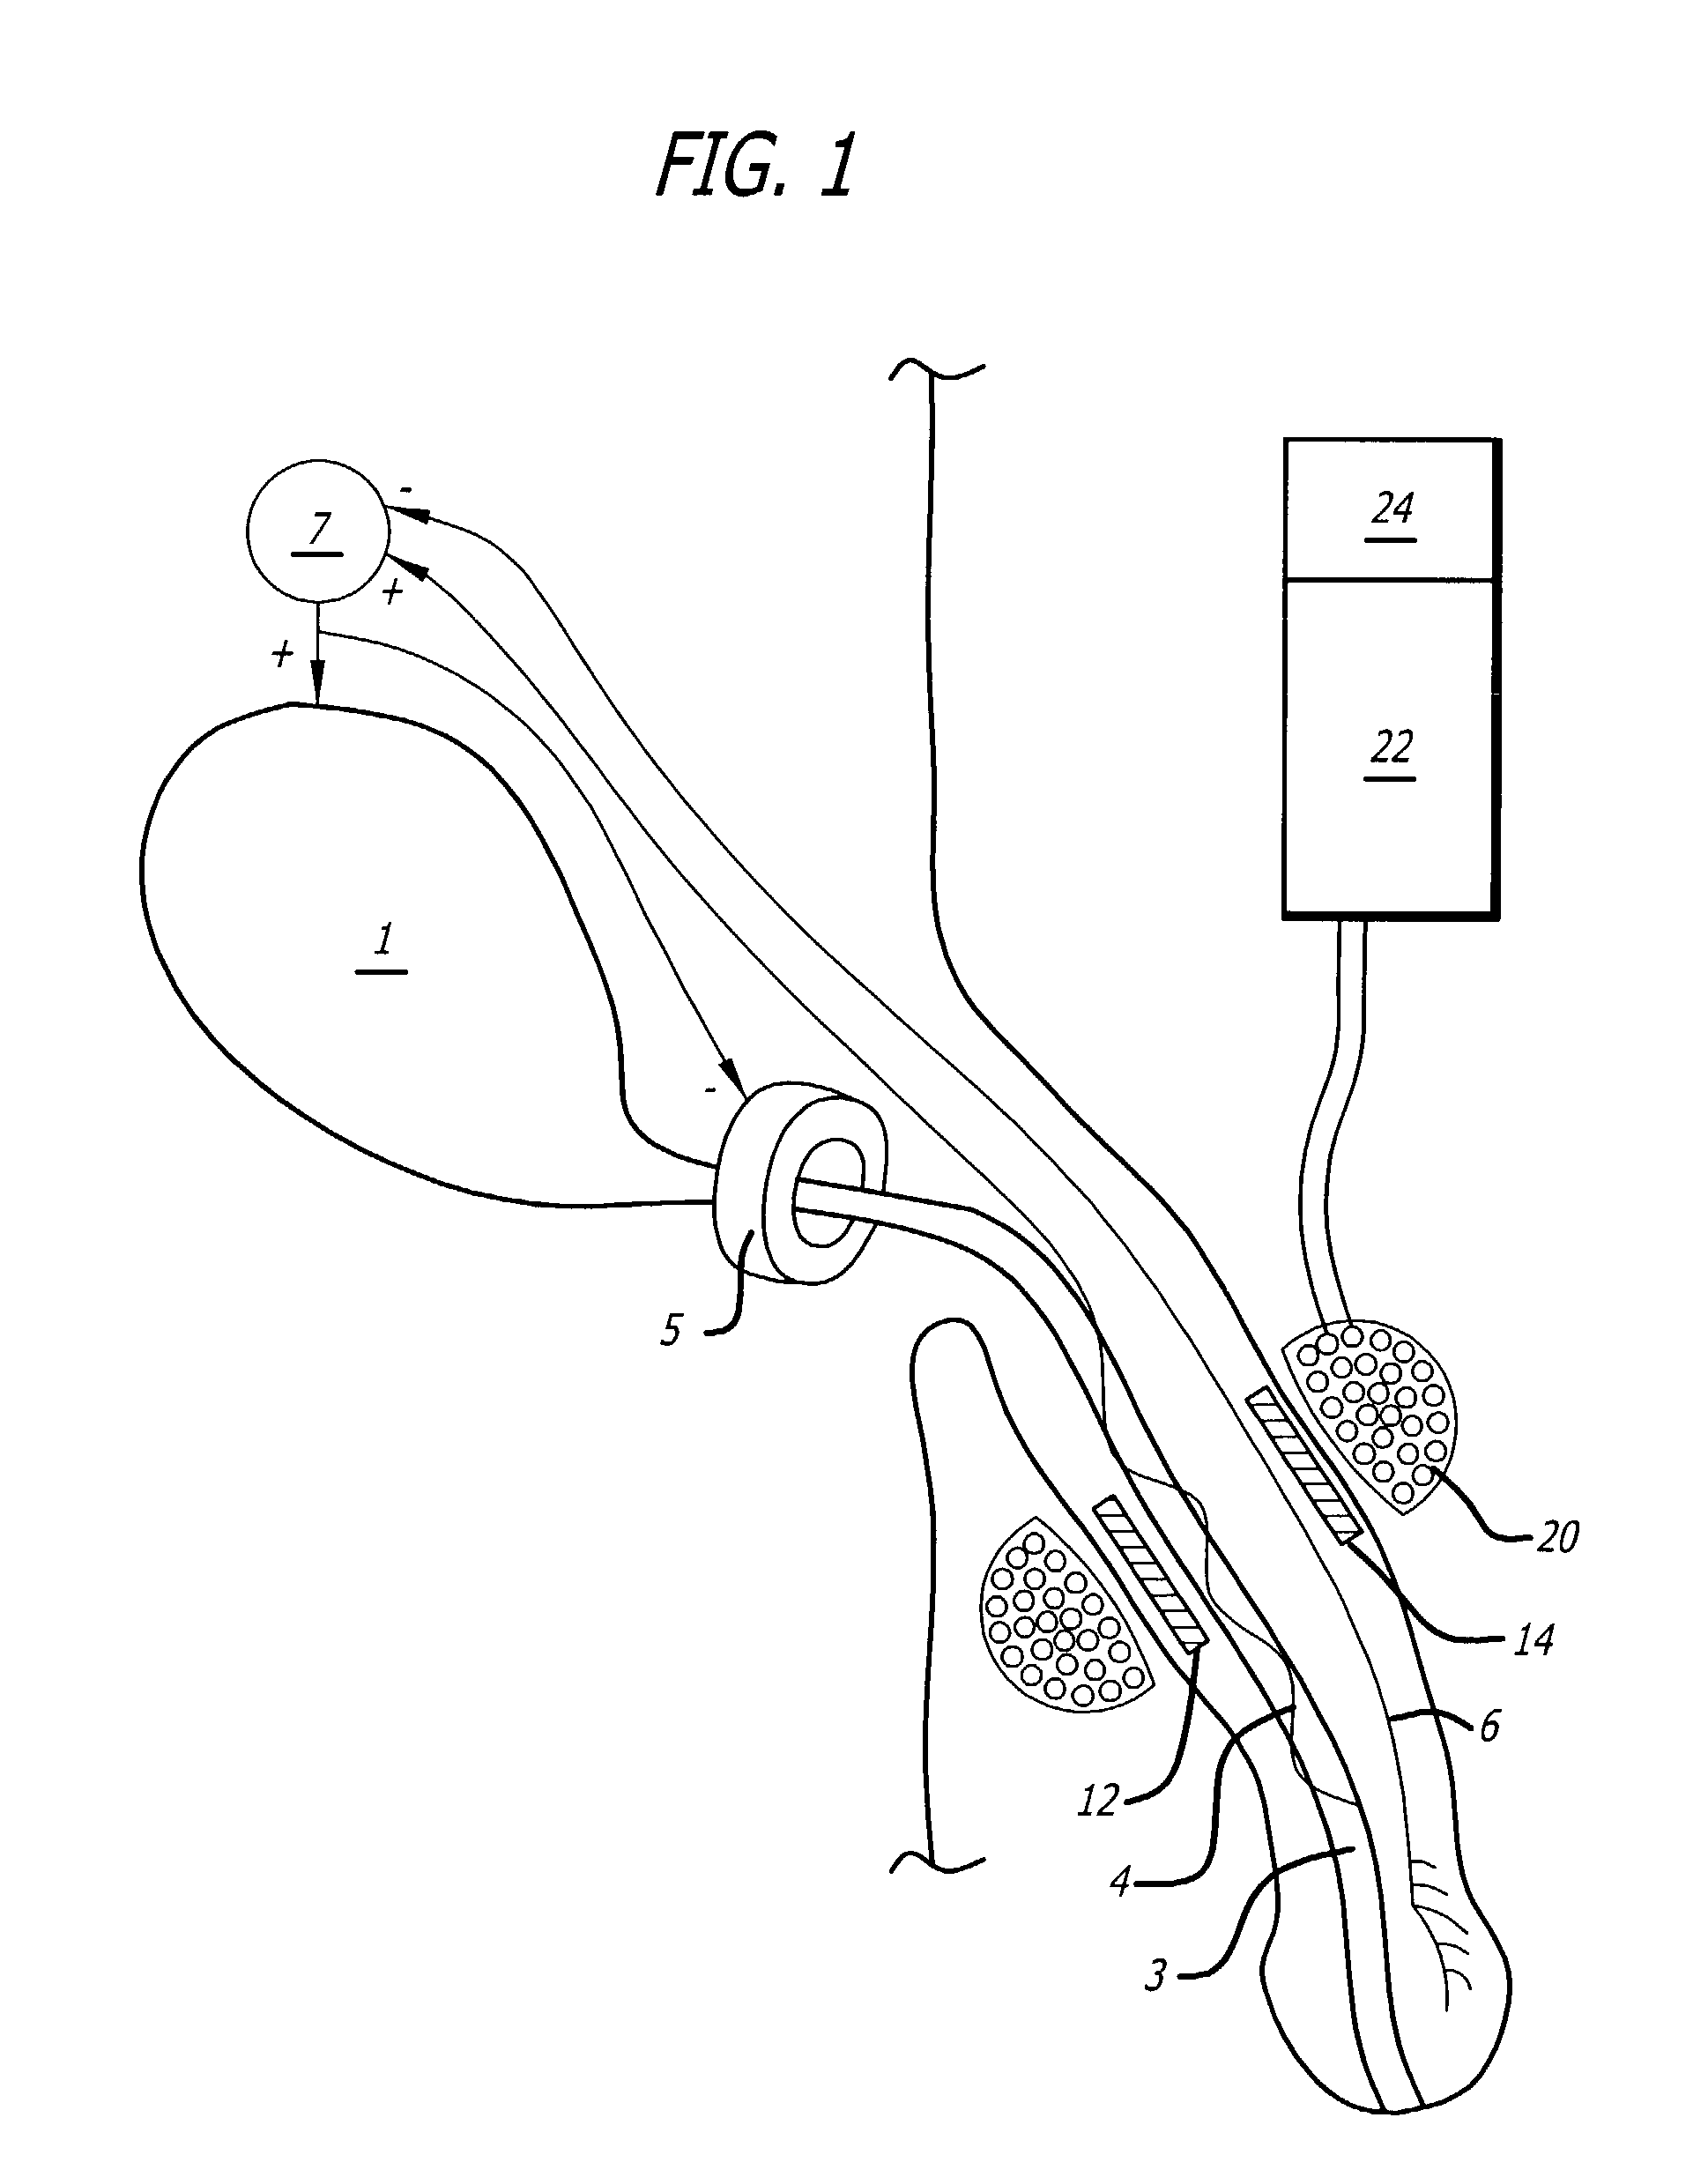 Method and apparatus for the treatment of urinary tract dysfunction